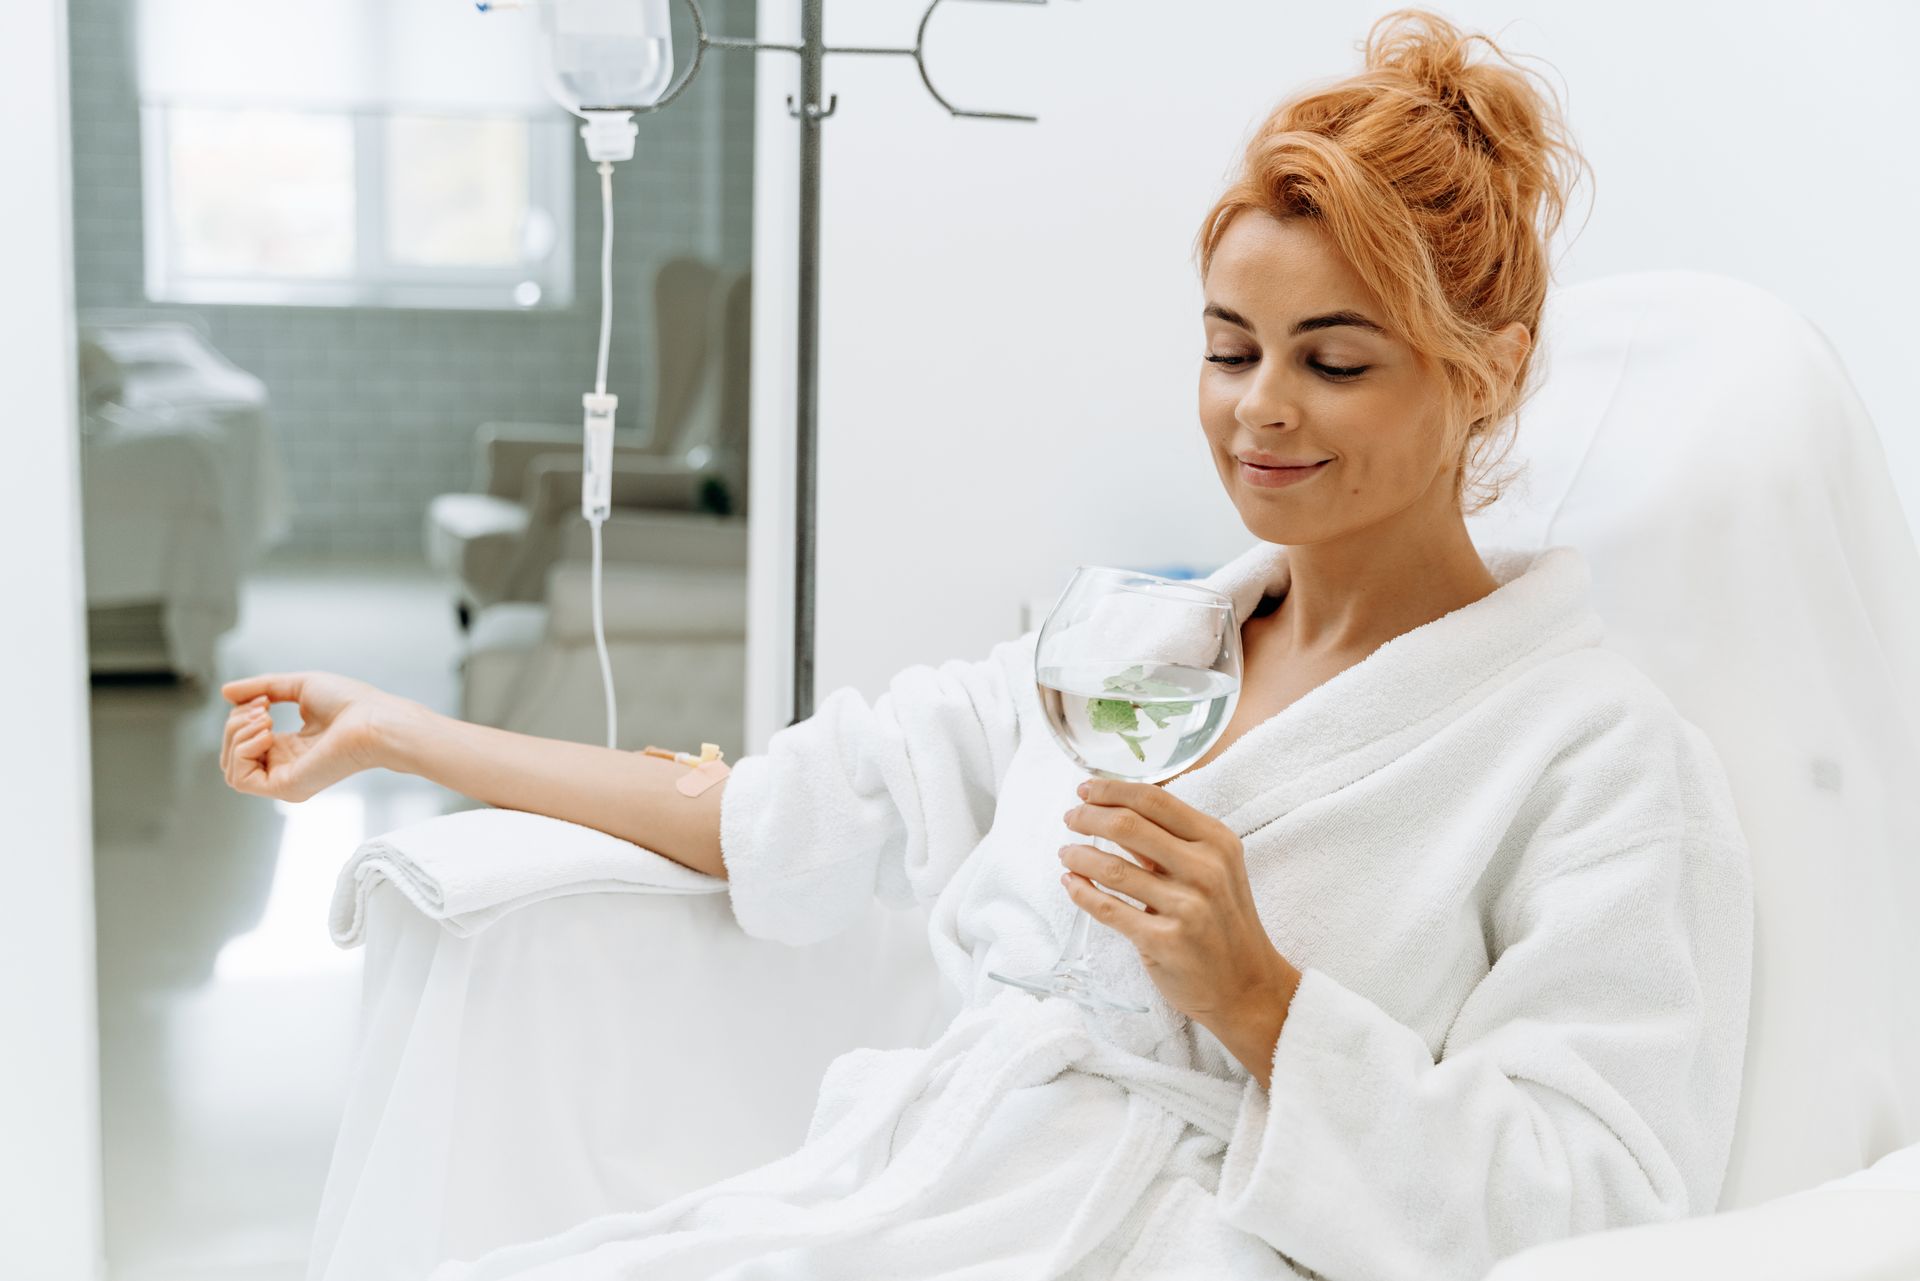 a woman in a bathrobe is holding a glass of water